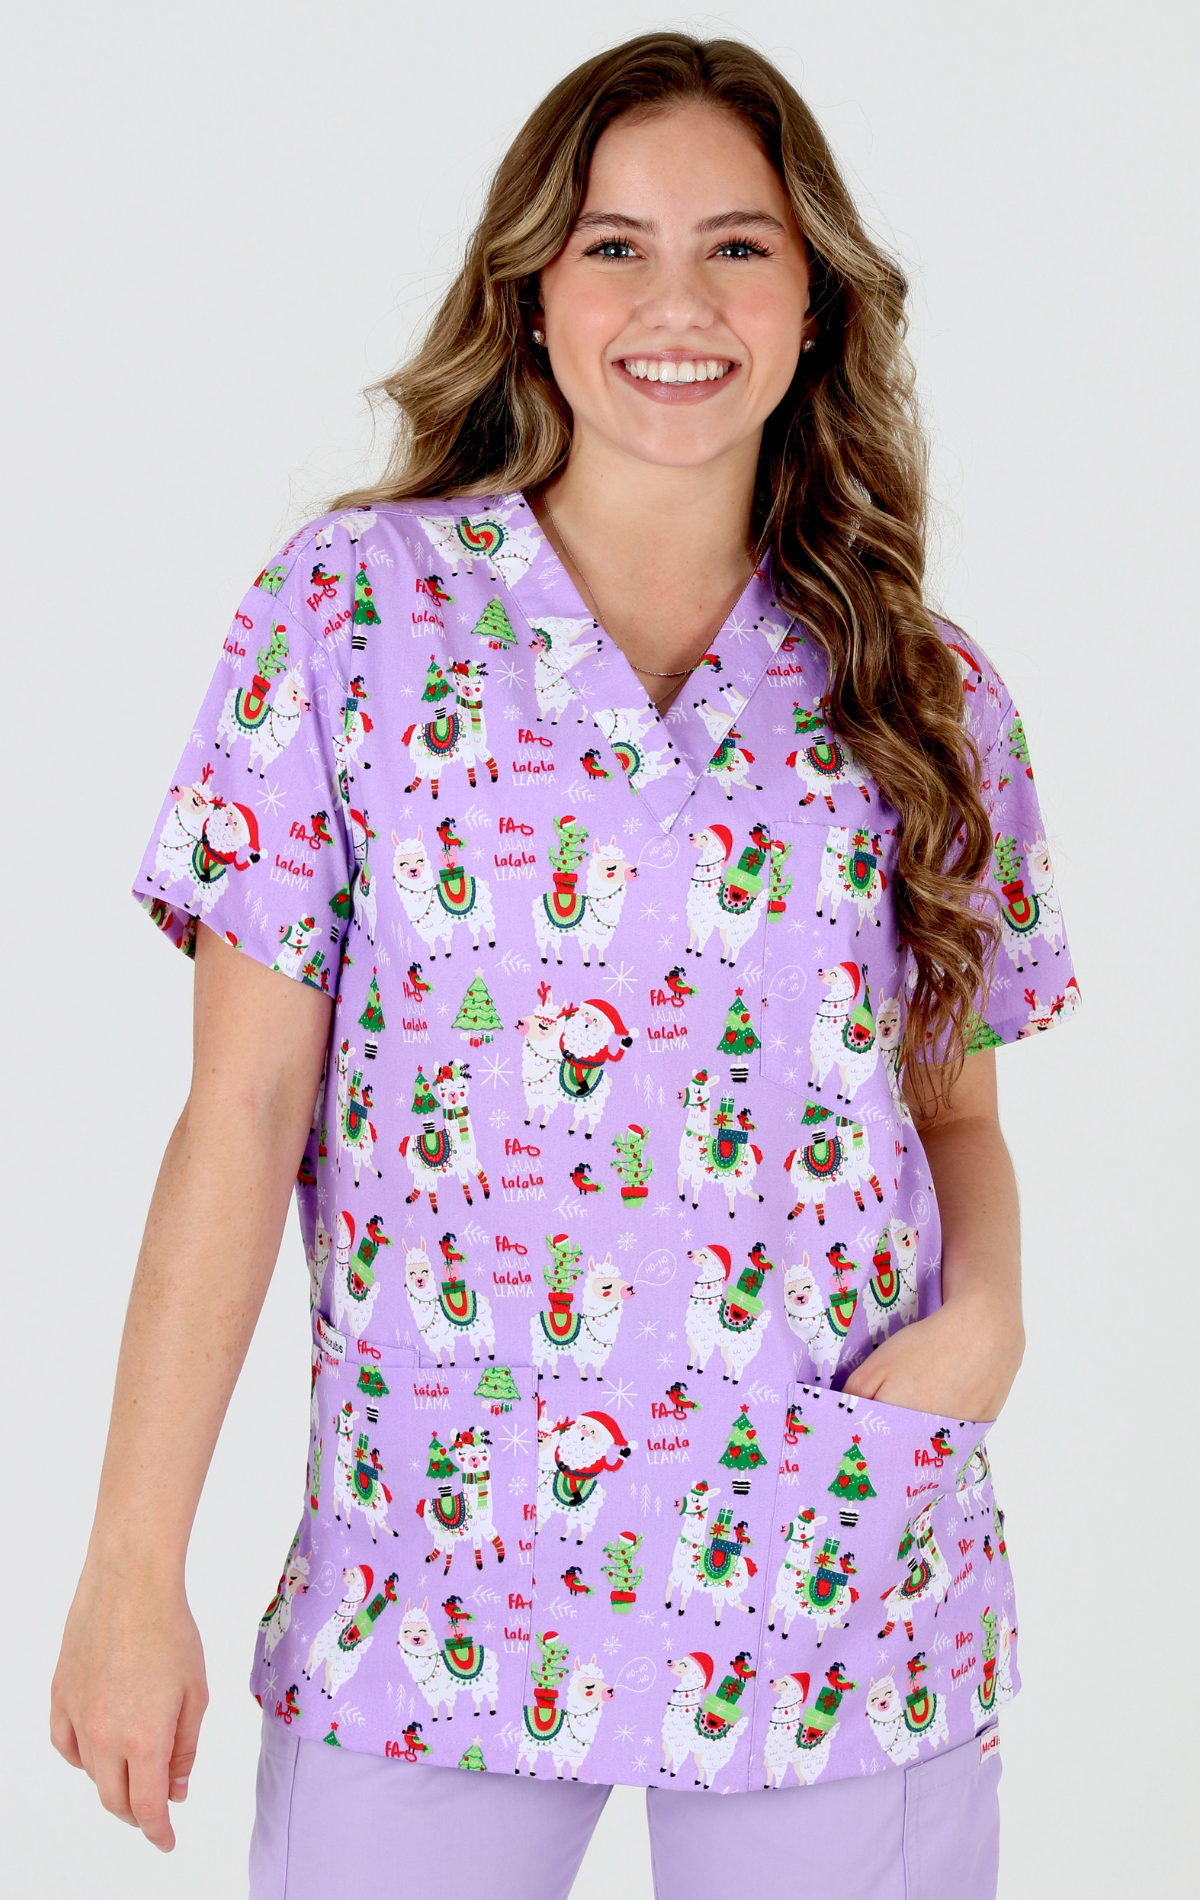 Spread Holiday Cheer with 50% Off: Shop the Festive 2022 Xmas Scrub Prints at our "Christmas in July Sale!"